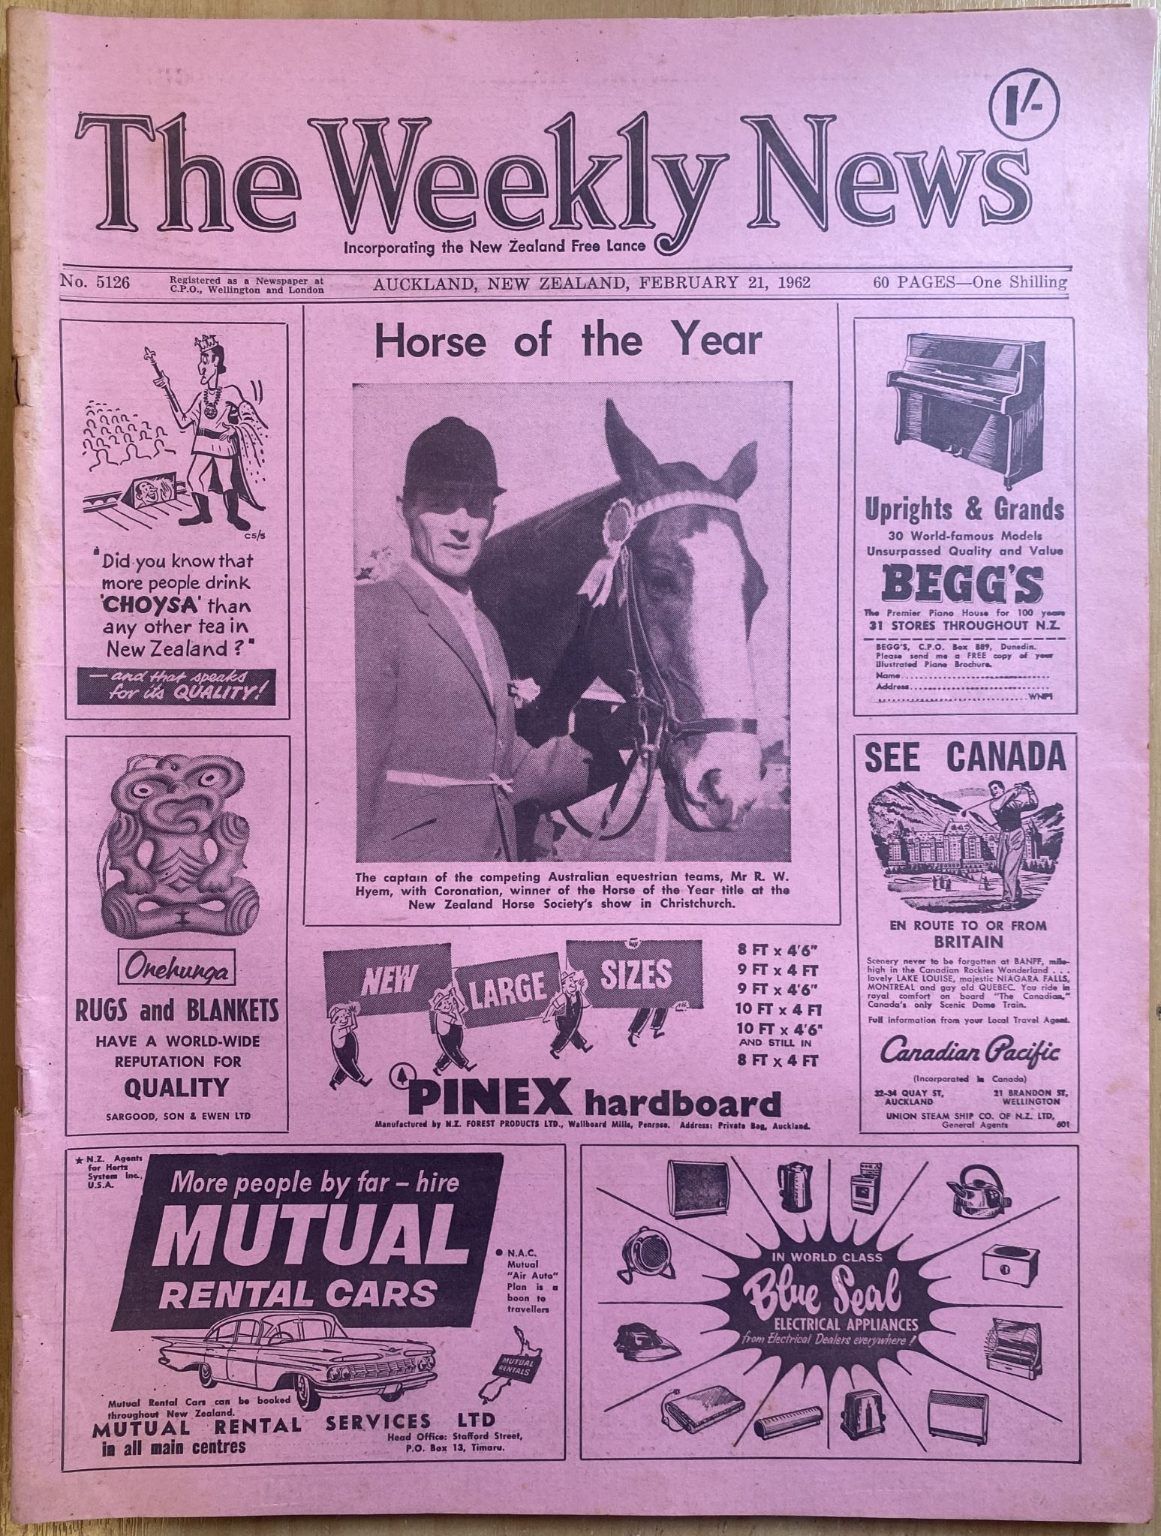 OLD NEWSPAPER: The Weekly News, No. 5126, 21 February 1962